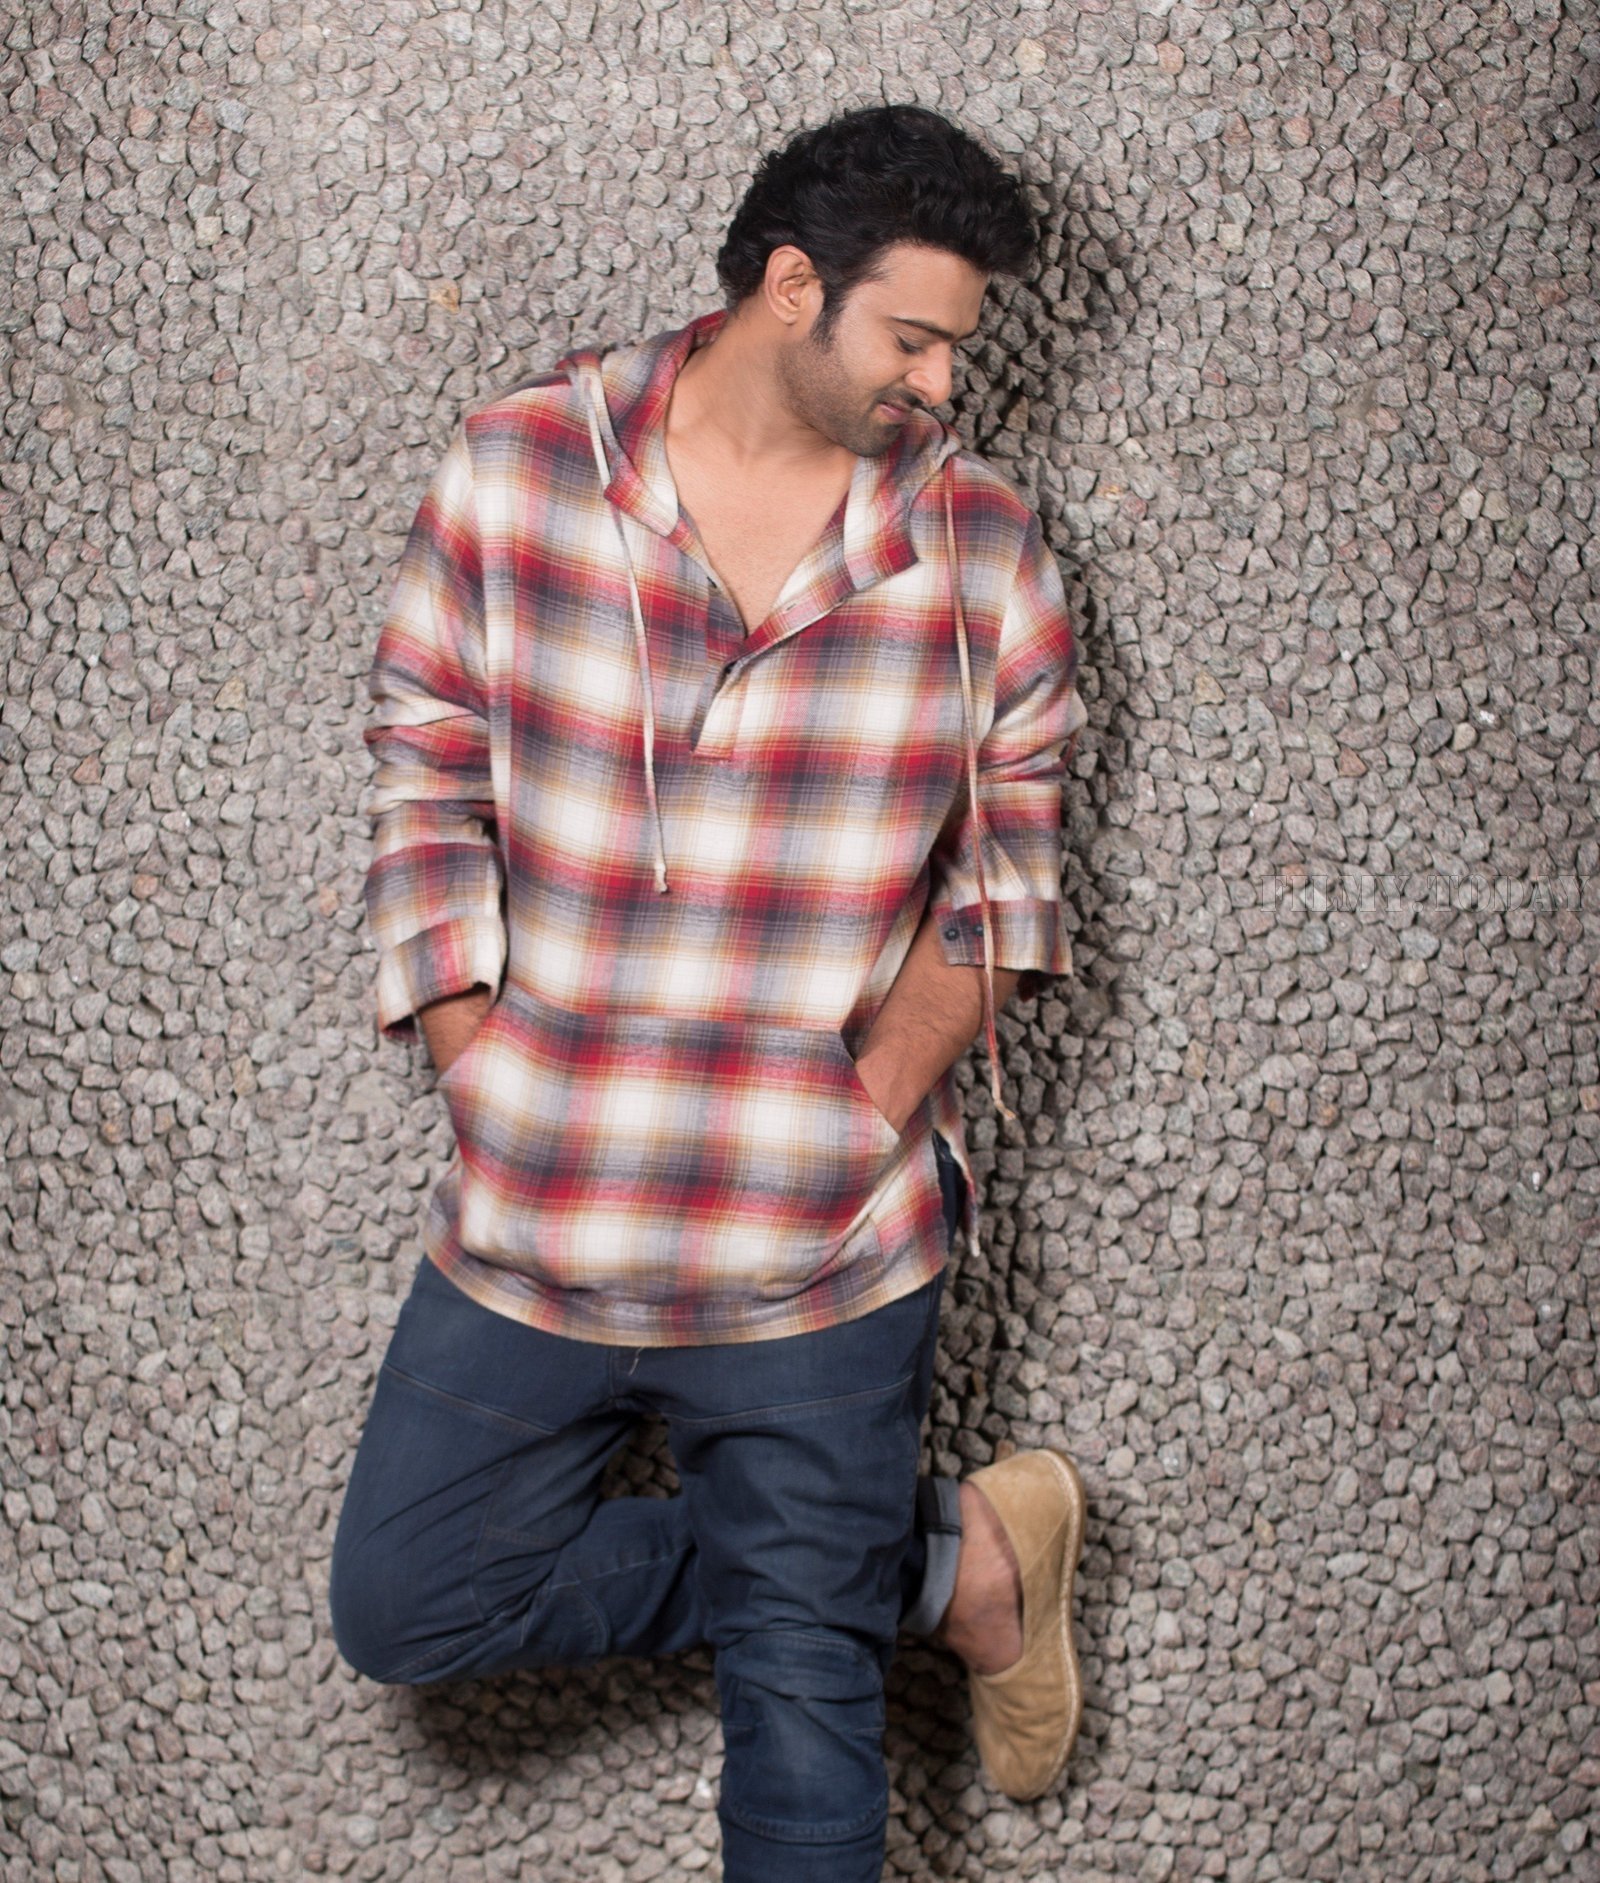 Prabhas Latest Photoshoot For His 38th Birthday | Picture 1538702